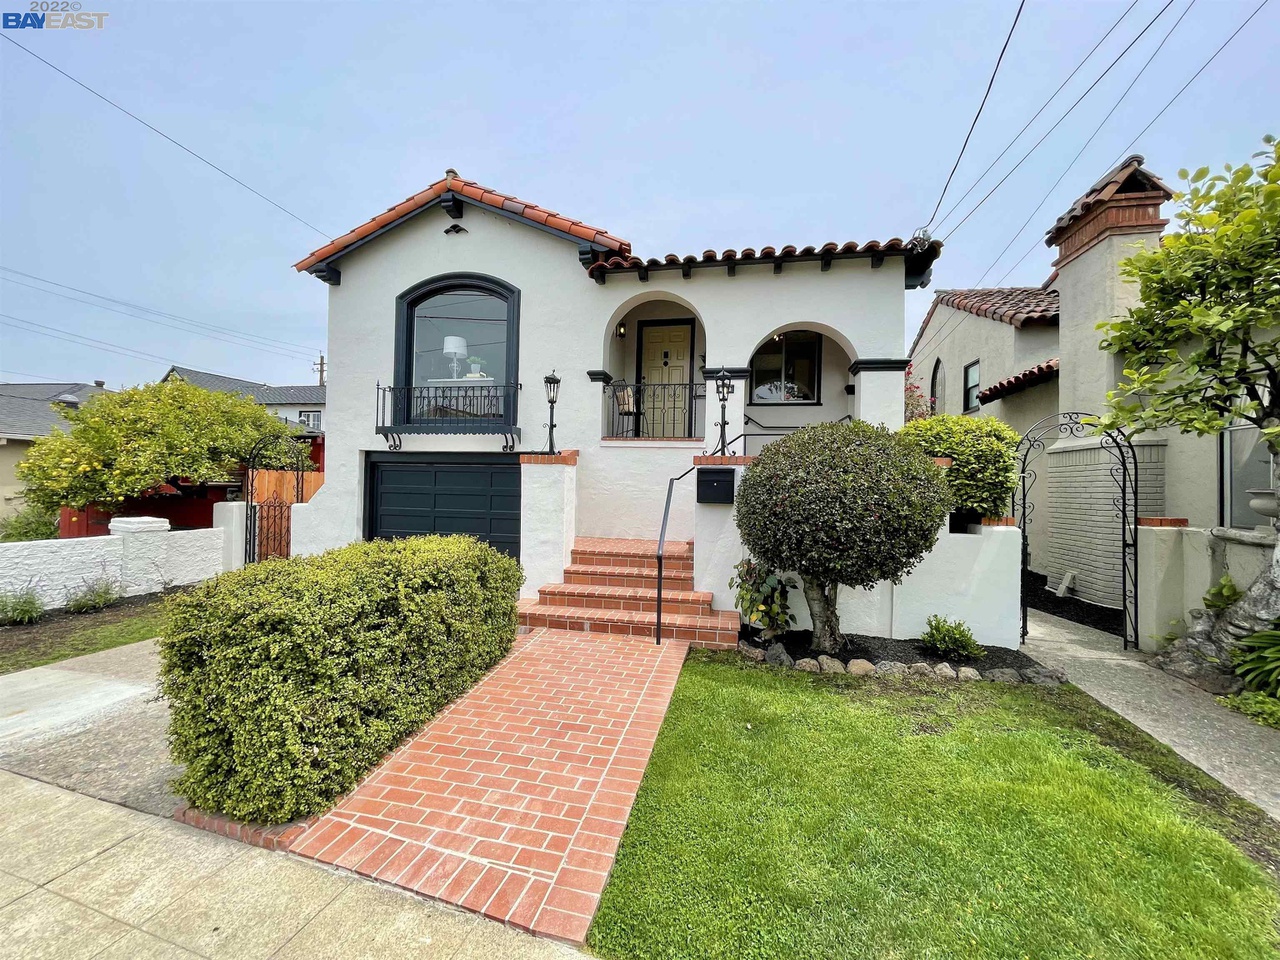 660 Lee Ave, San Leandro, CA 94577 | MLS# 40991772 | Redfin